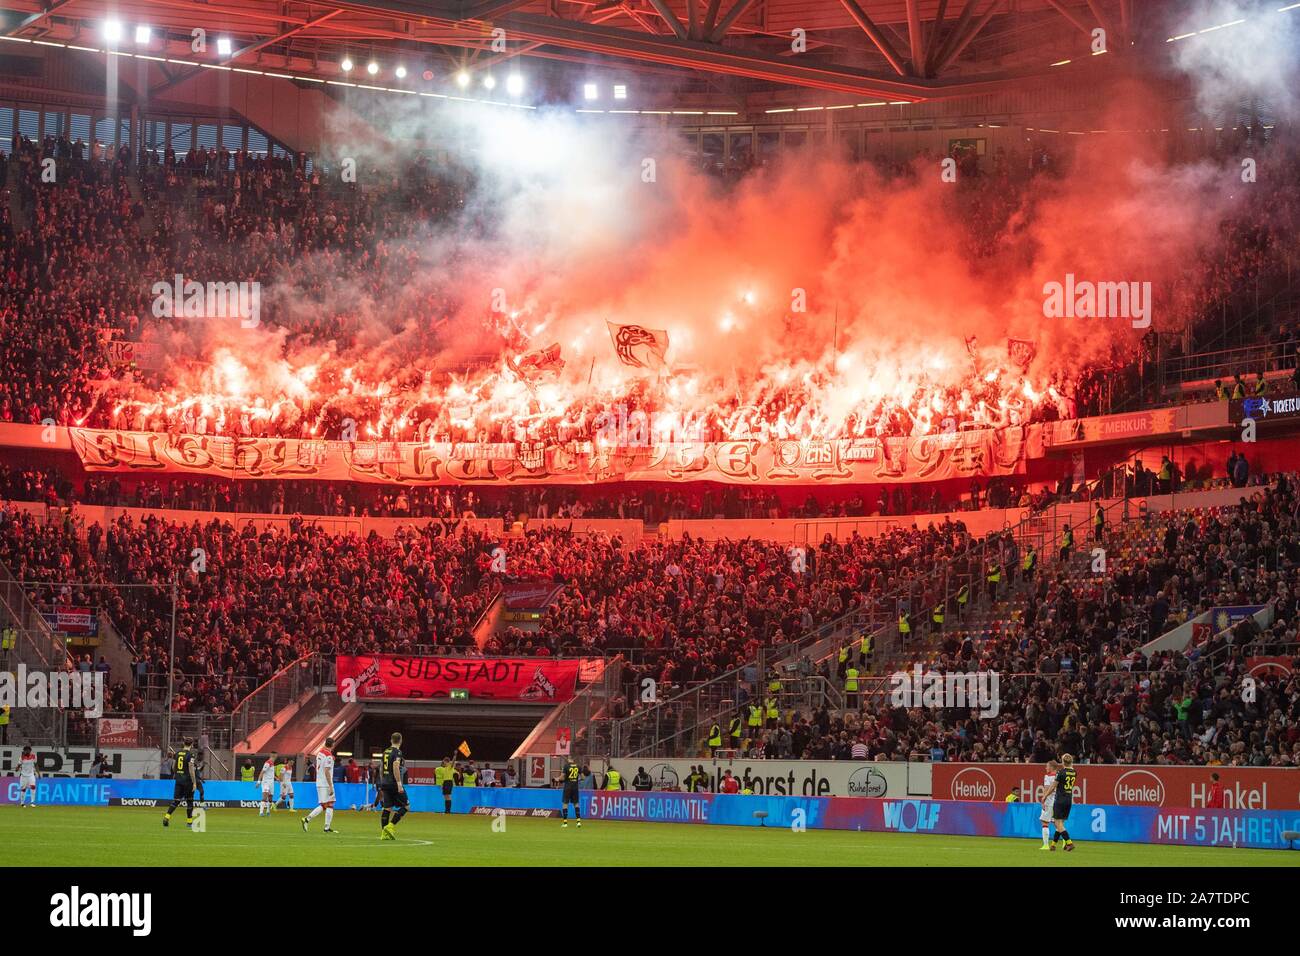 Ultras Football High Resolution Stock Photography and Images - Alamy